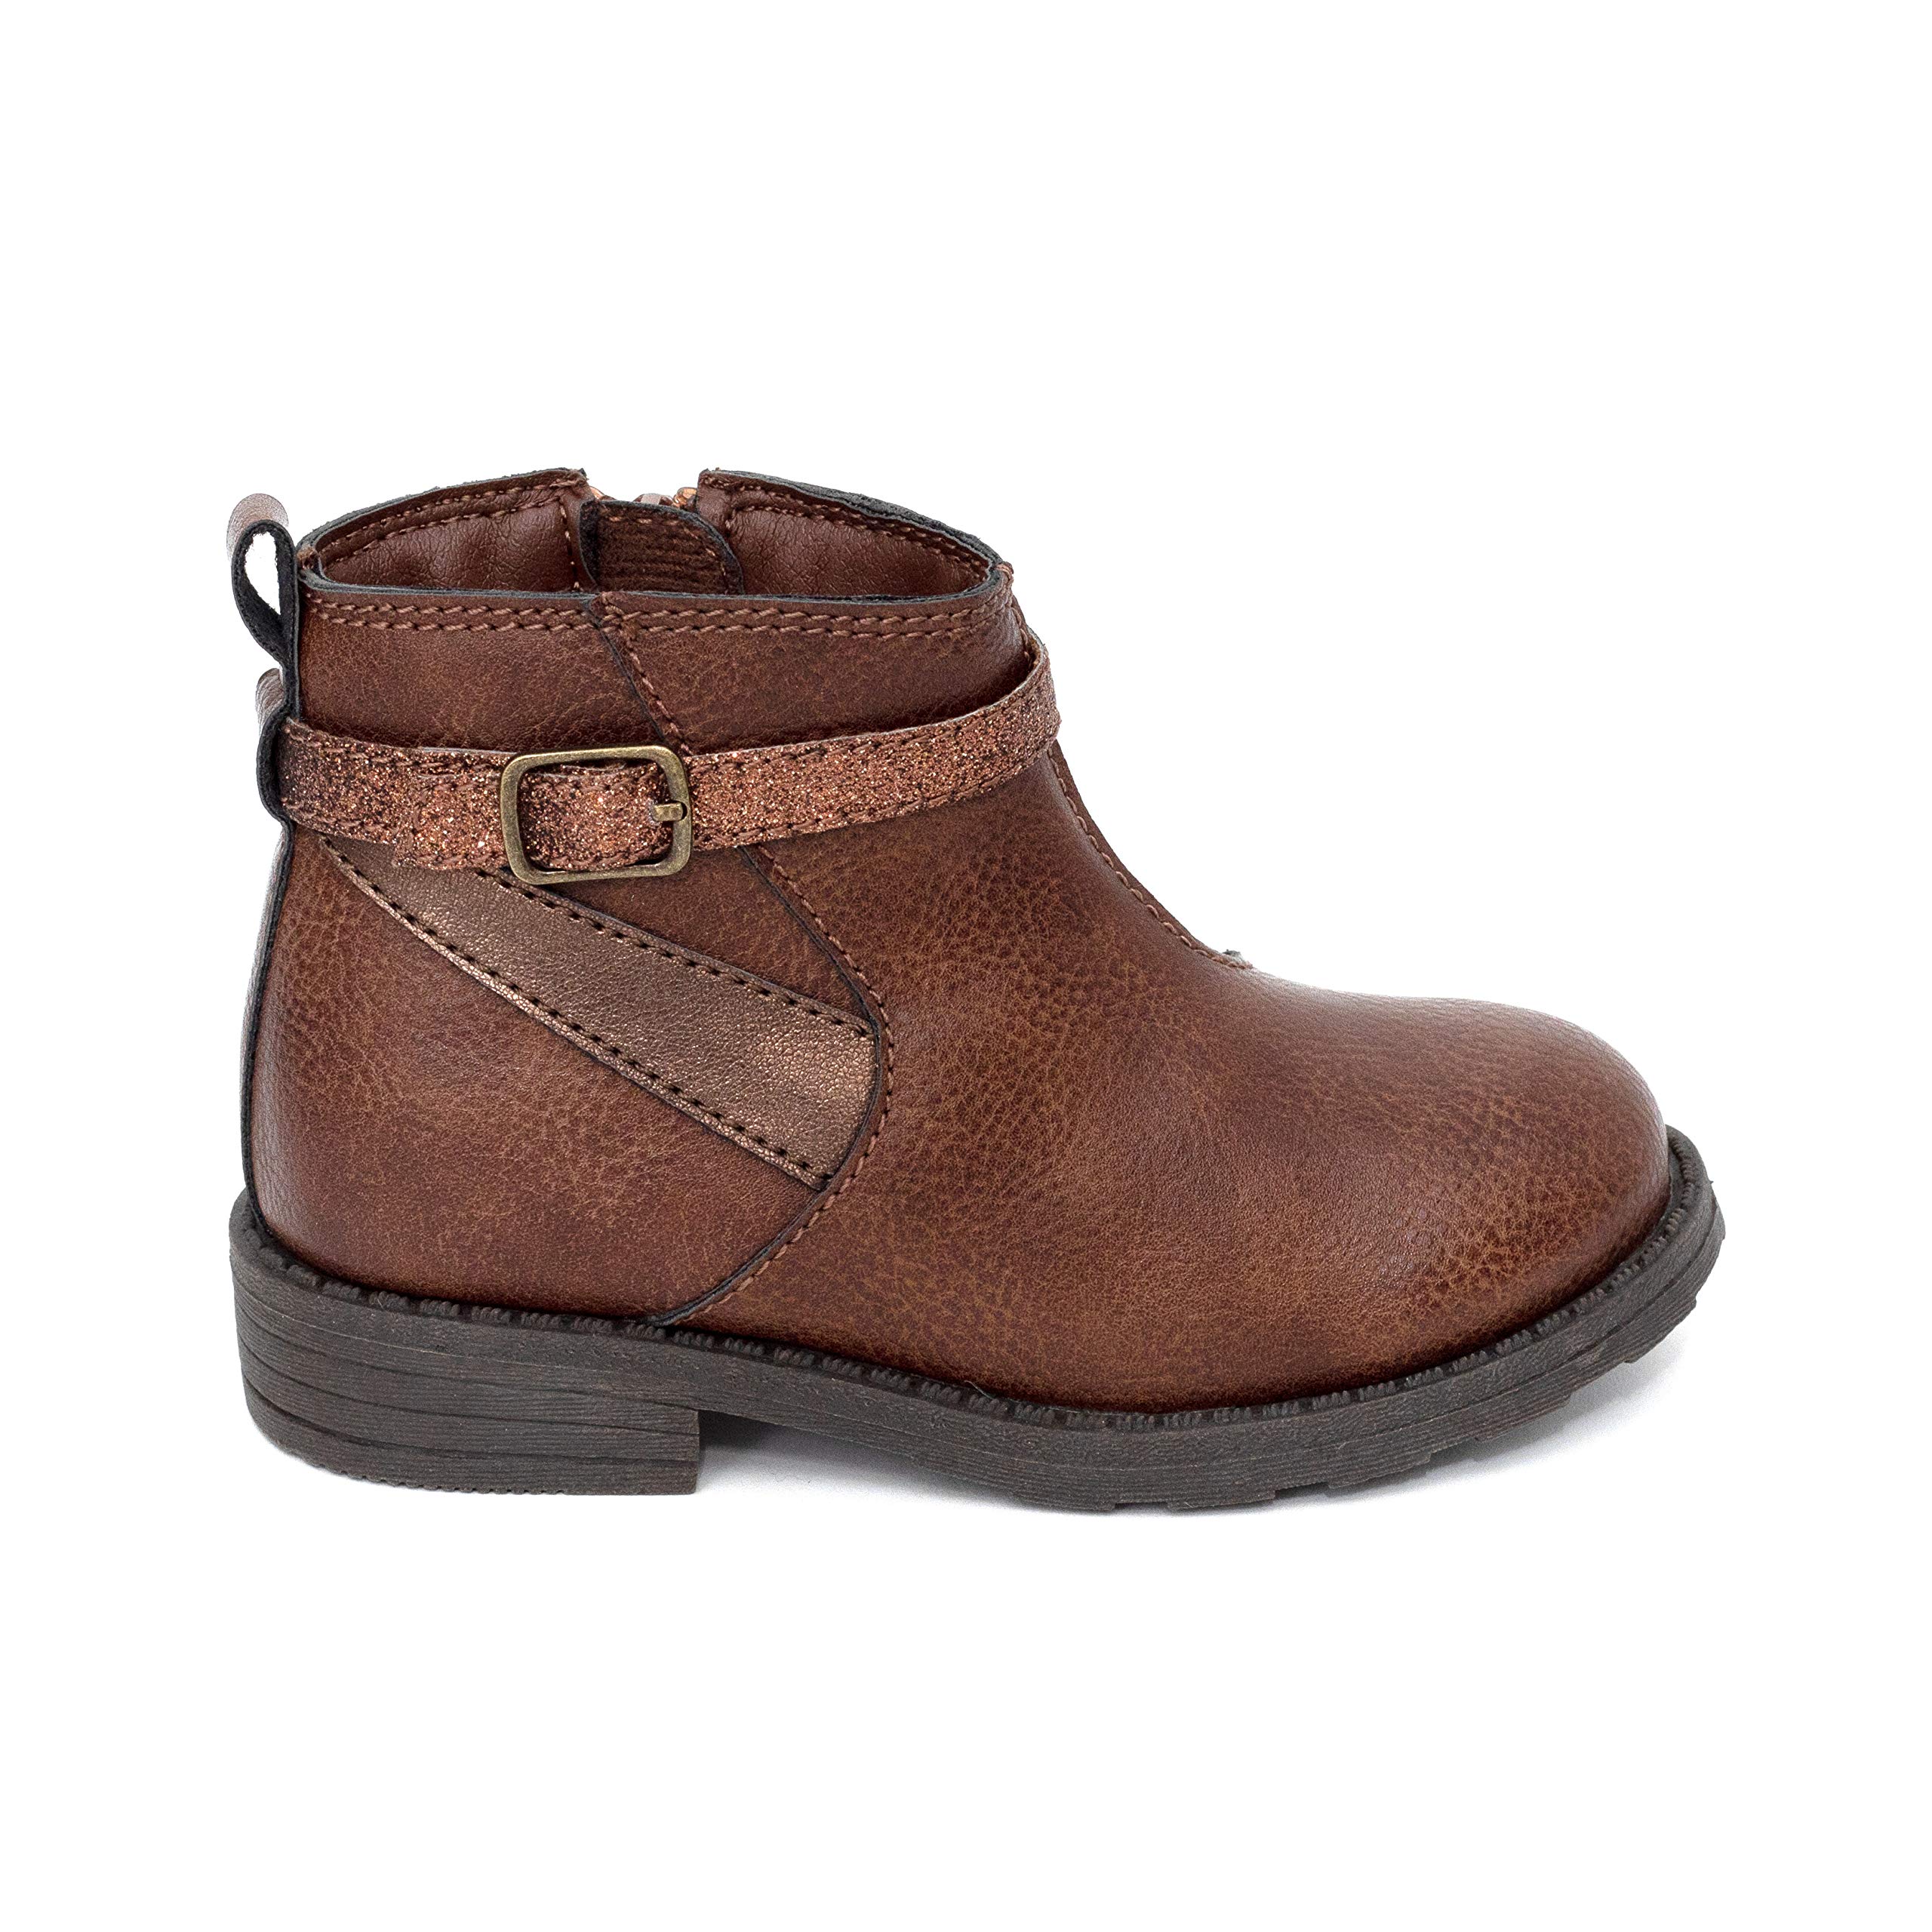 Simple Joys by Carter's Girls and Toddlers' Darcy Fashion Boot